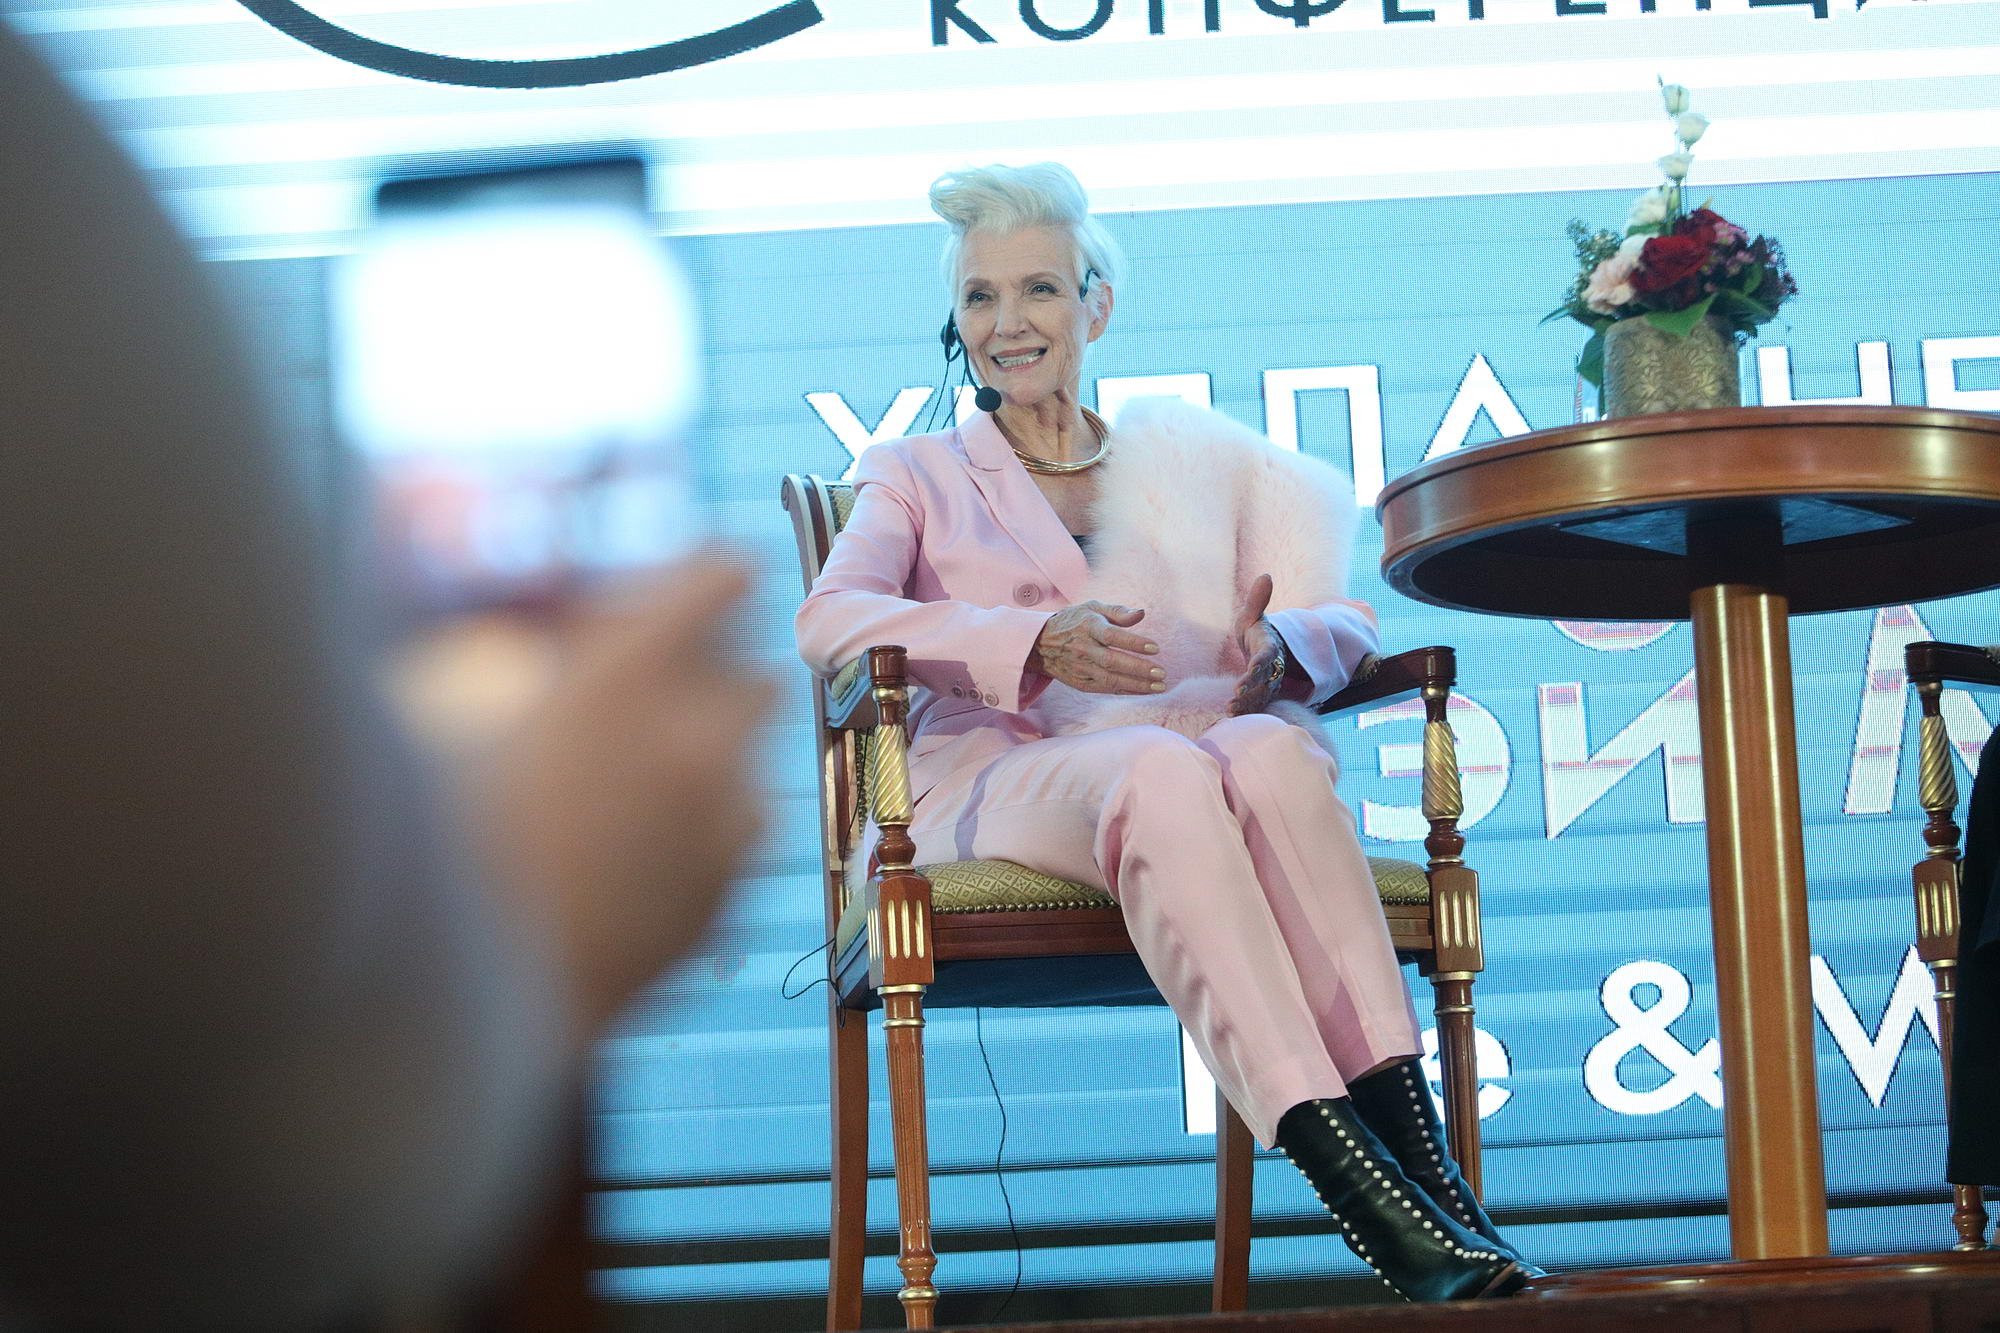 Maye Musk shared her secret of looking fashionable. She says that’s the team of professionals that makes her look “fabulous.” (Volodymyr Petrov)